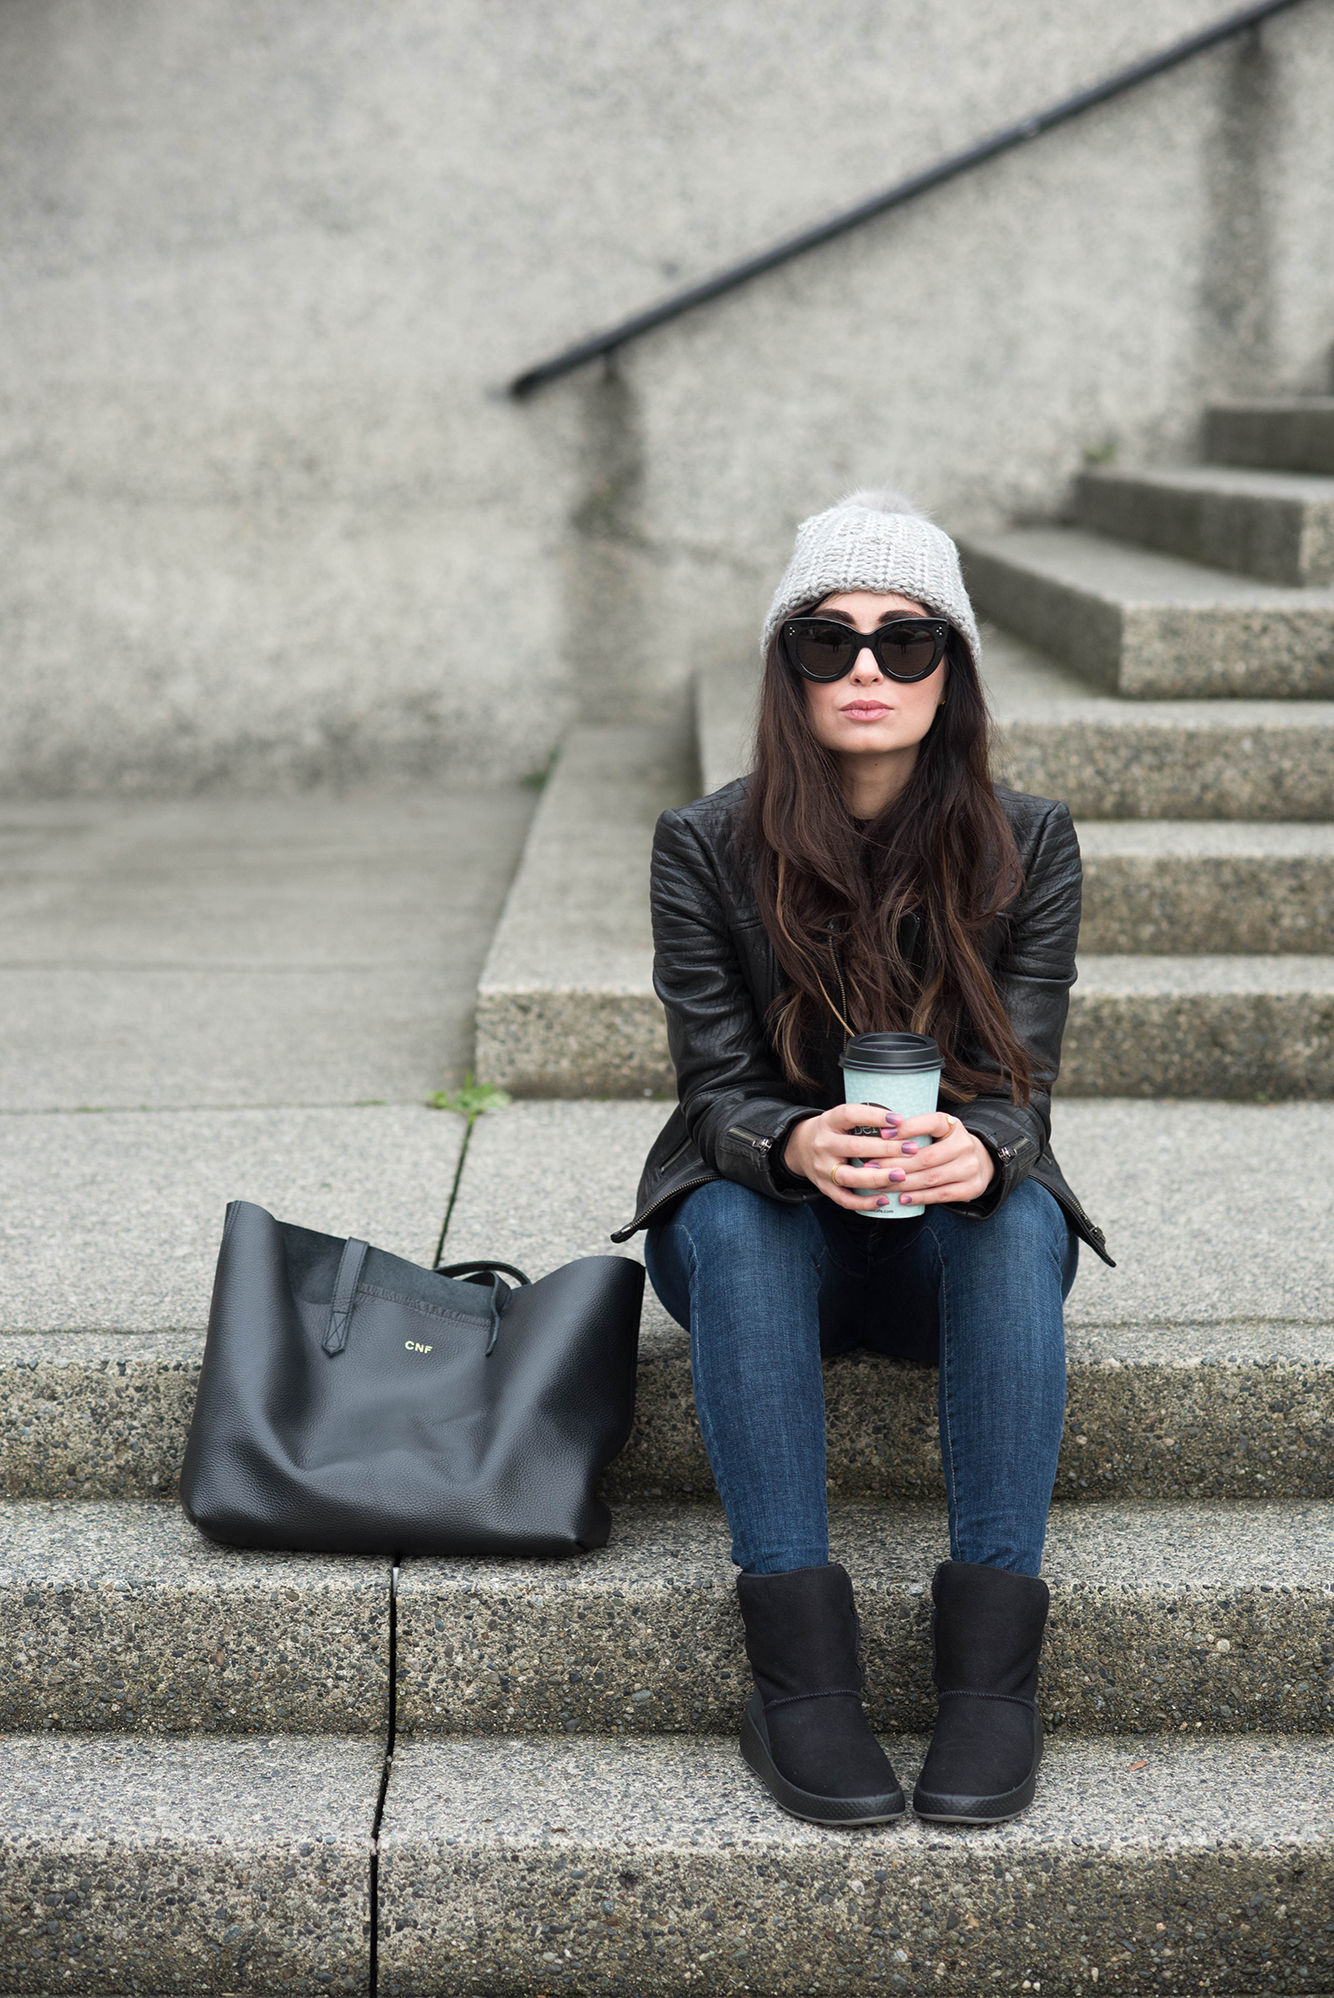 coco-and-vera-top-vancouver-fashion-blog-top-canadian-fashion-blog-top-blogger-street-style-ecco-ukiuk-boots-cupcakes-and-cashmere-jacket-yoga-jeans-hm-toque-celine-sunglasses-cuyana-tote